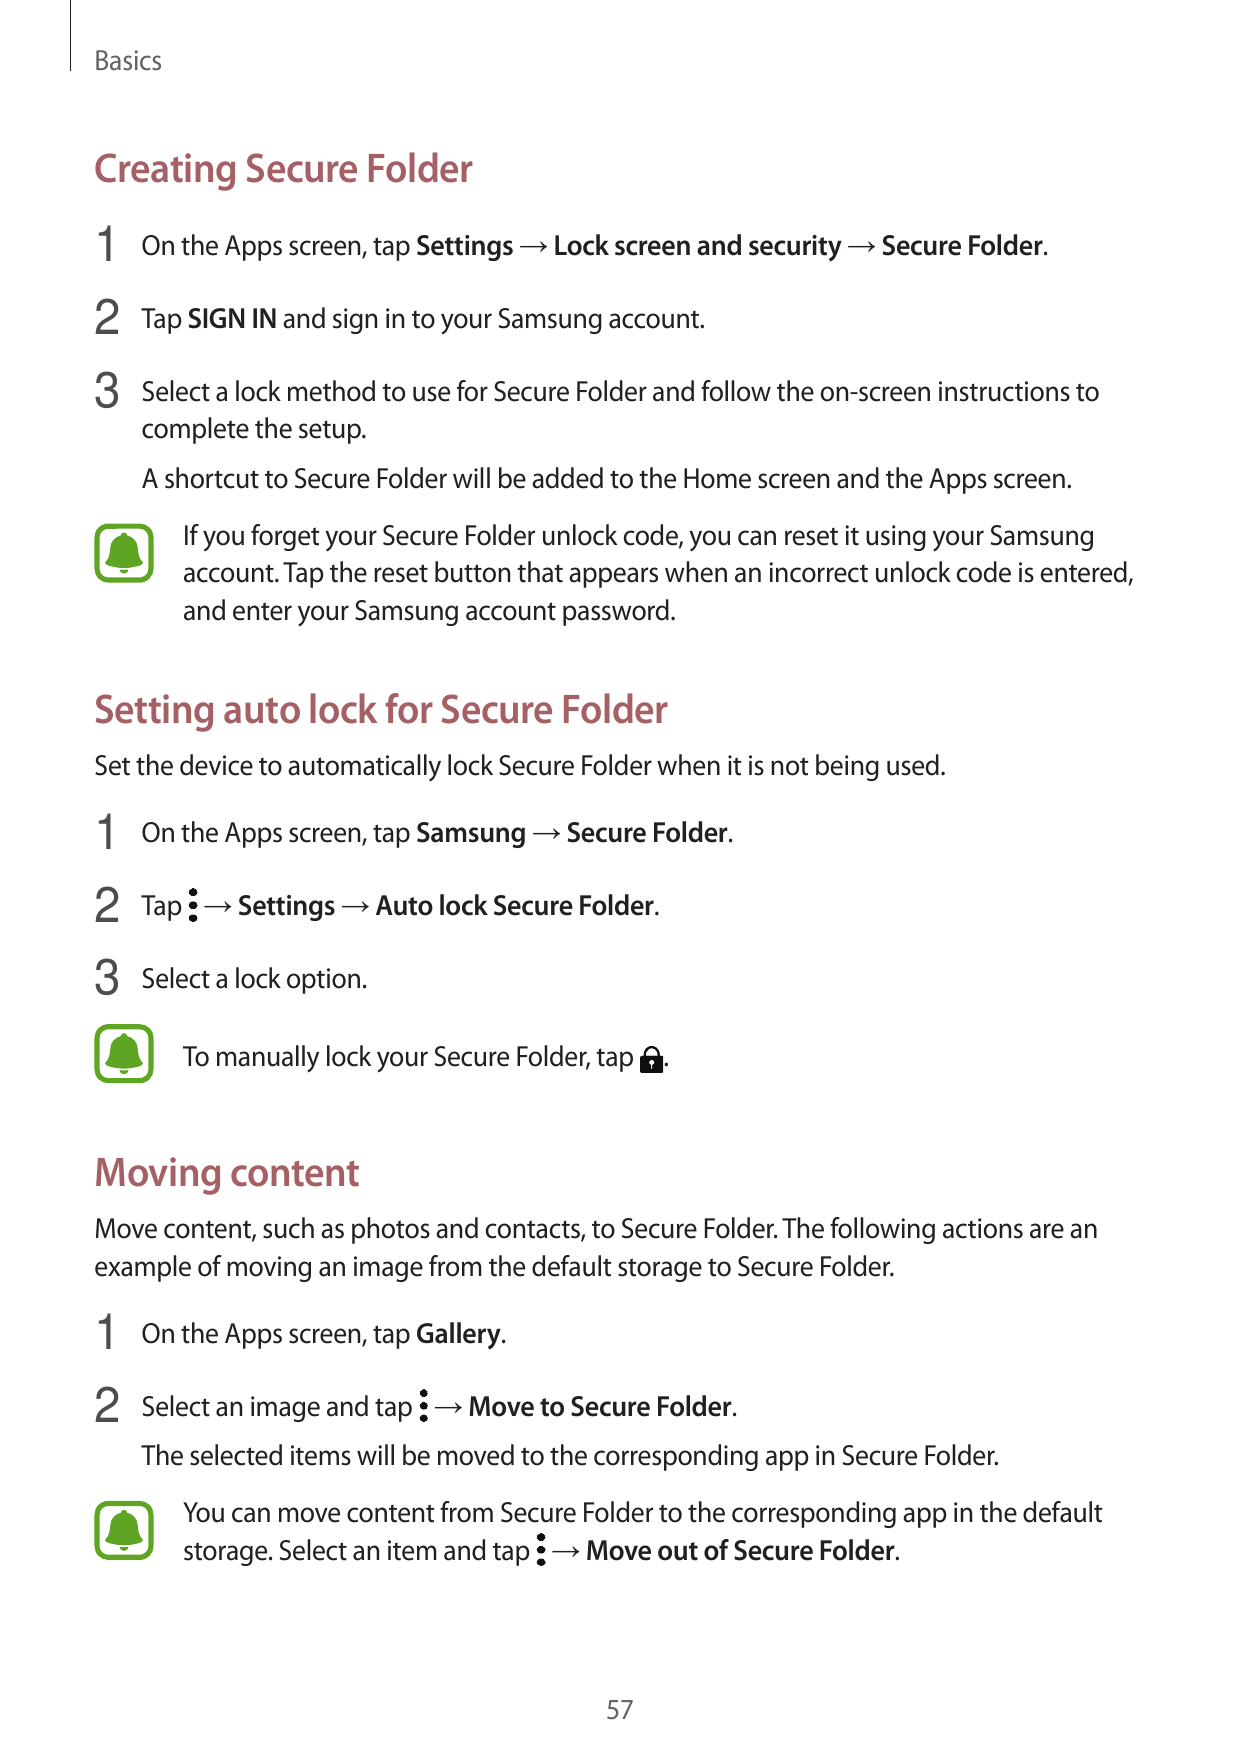 BasicsCreating Secure Folder1 On the Apps screen, tap Settings → Lock screen and security → Secure Folder.2 Tap SIGN IN and sign